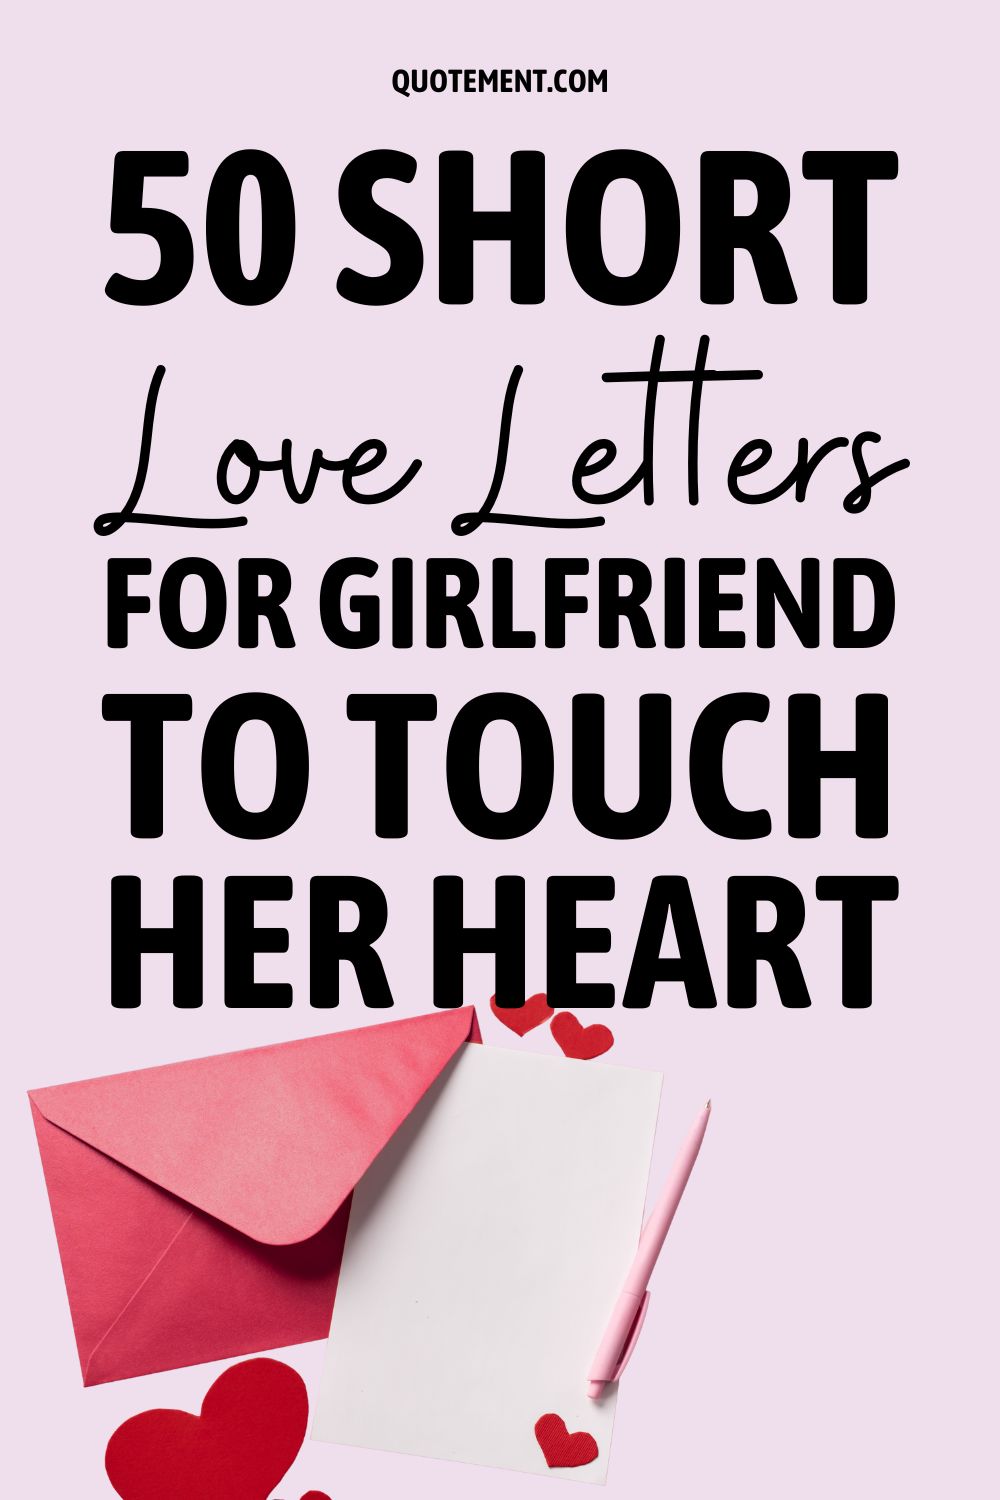 50 Short Love Letters For Girlfriend To Touch Her Heart
